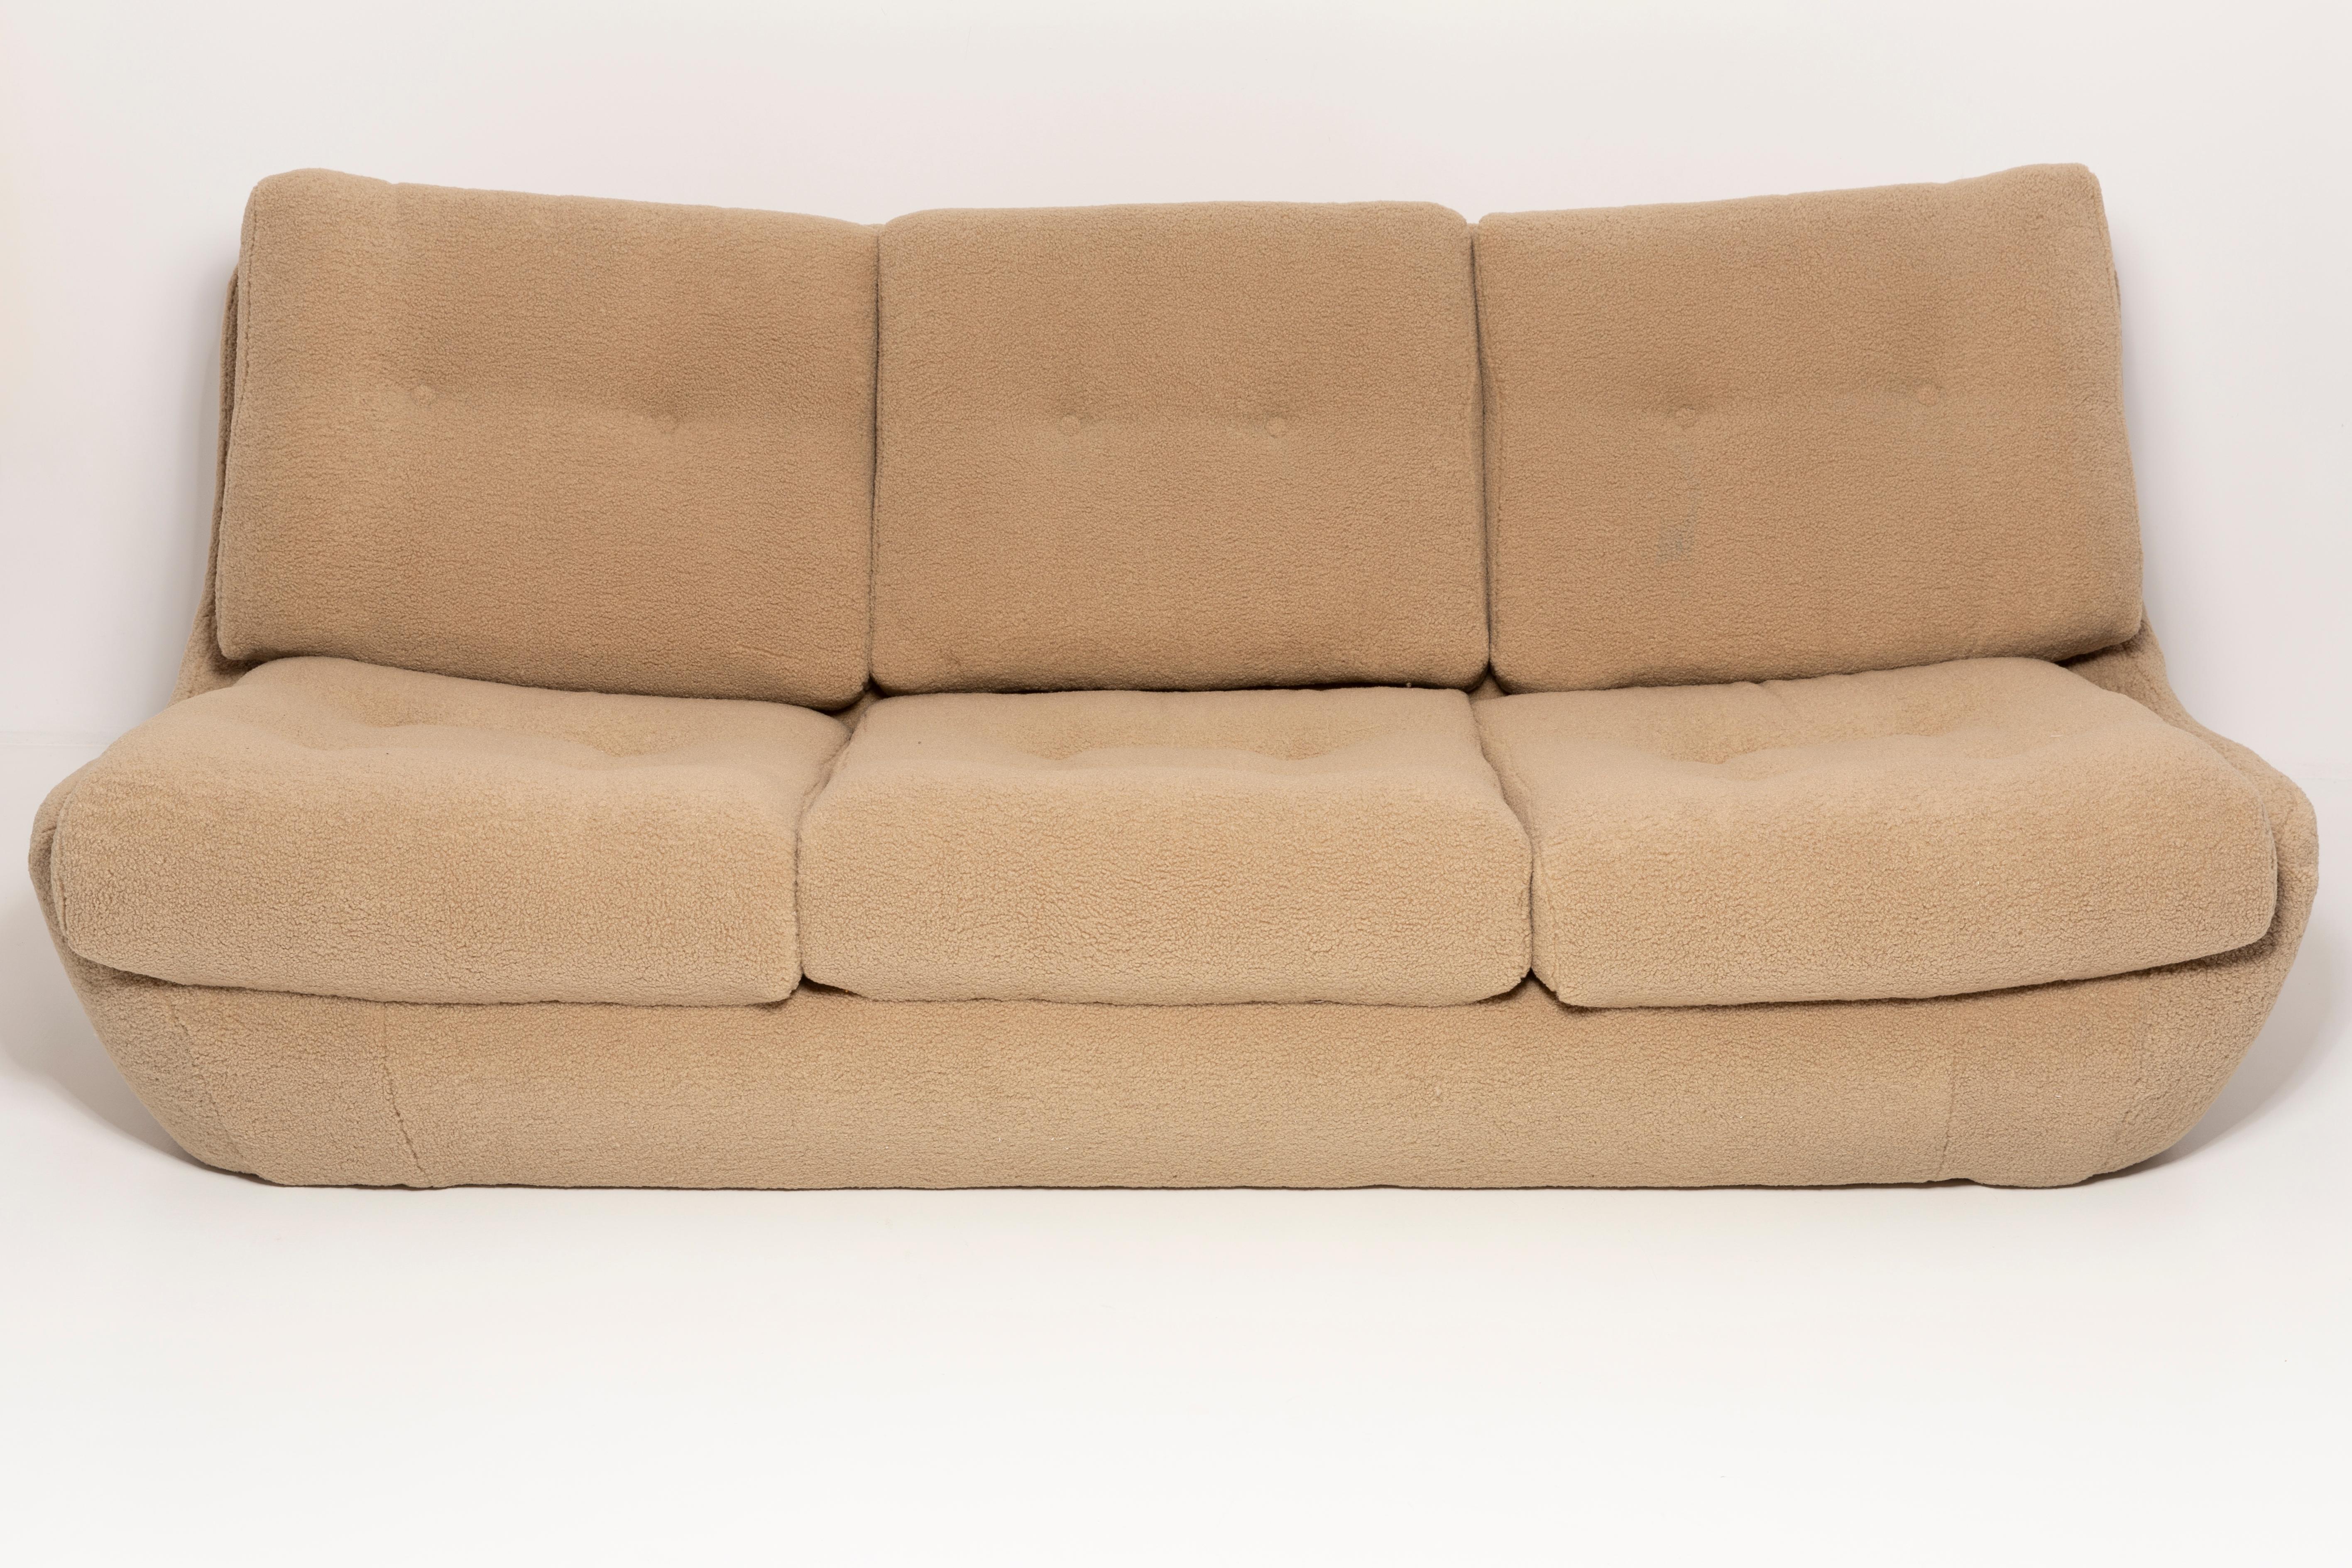 Atlantis sofa from the 1960s, produced in Czech Republic - at the moment they are unique. Due to their dimensions, they perfectly blend in even in small apartments providing comfort and beautiful decoration. Covered with high-quality camel boucle